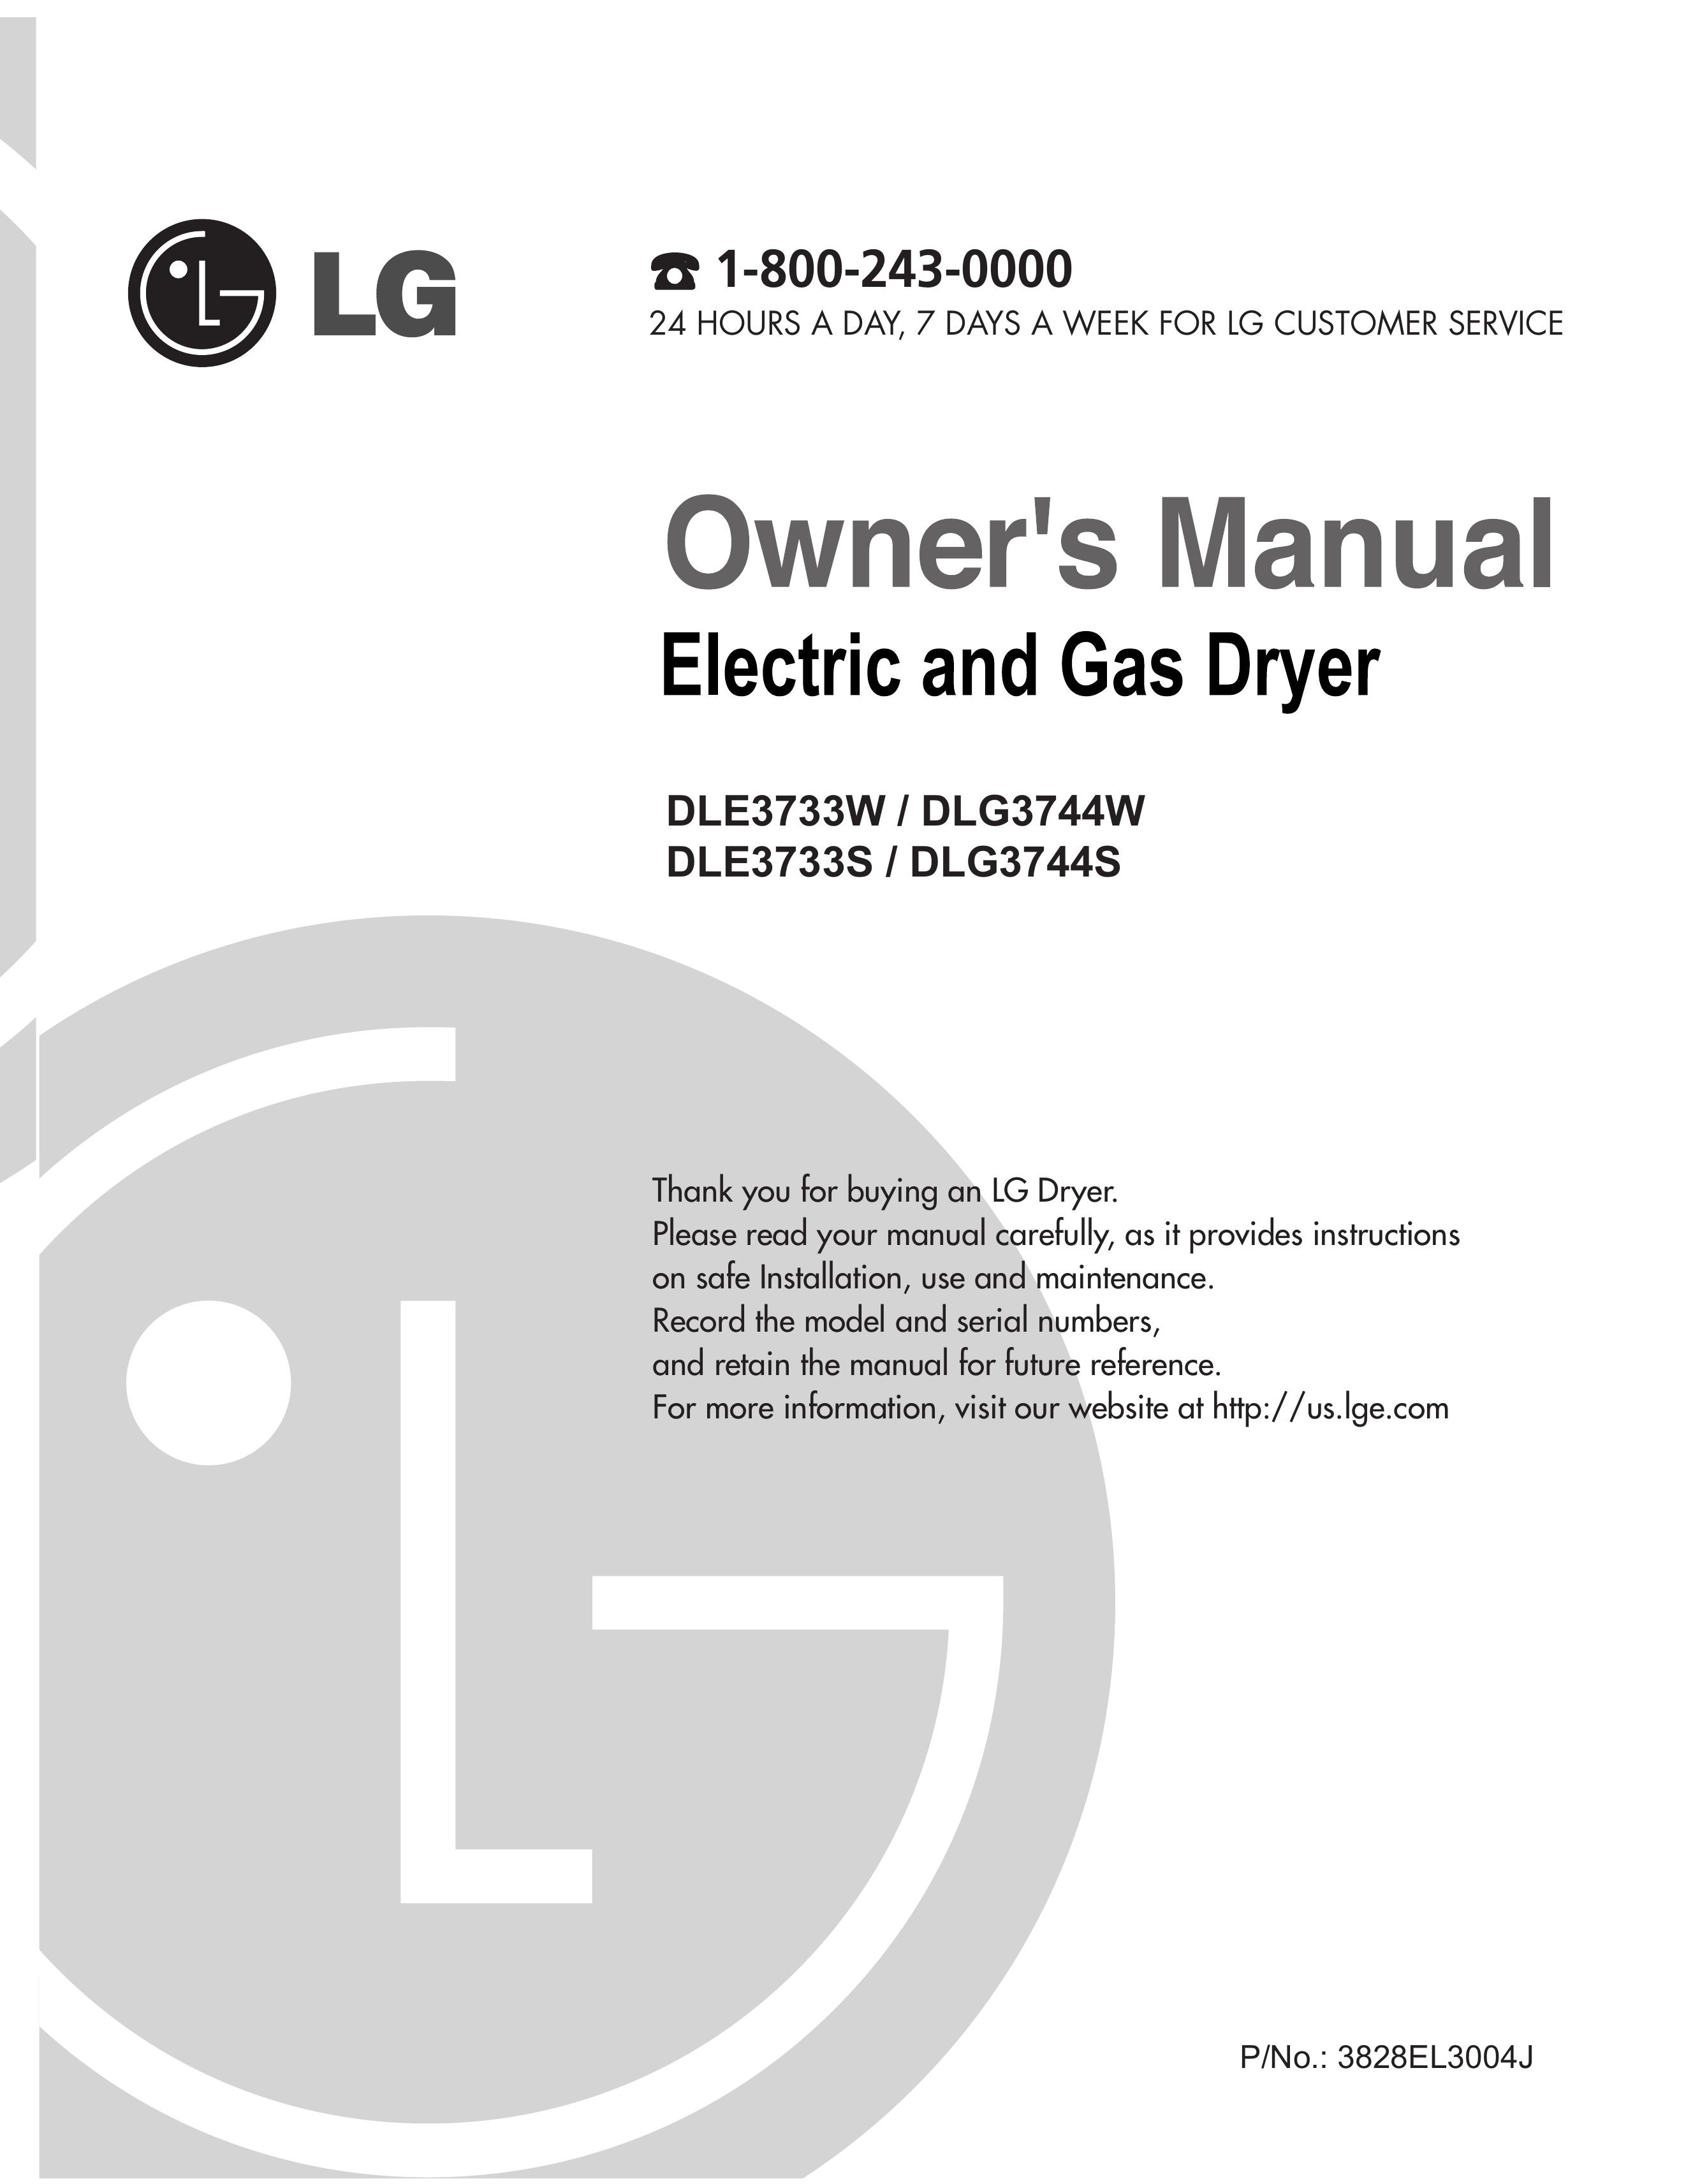 LG Electronics D3744W Clothes Dryer User Manual (Page 1)